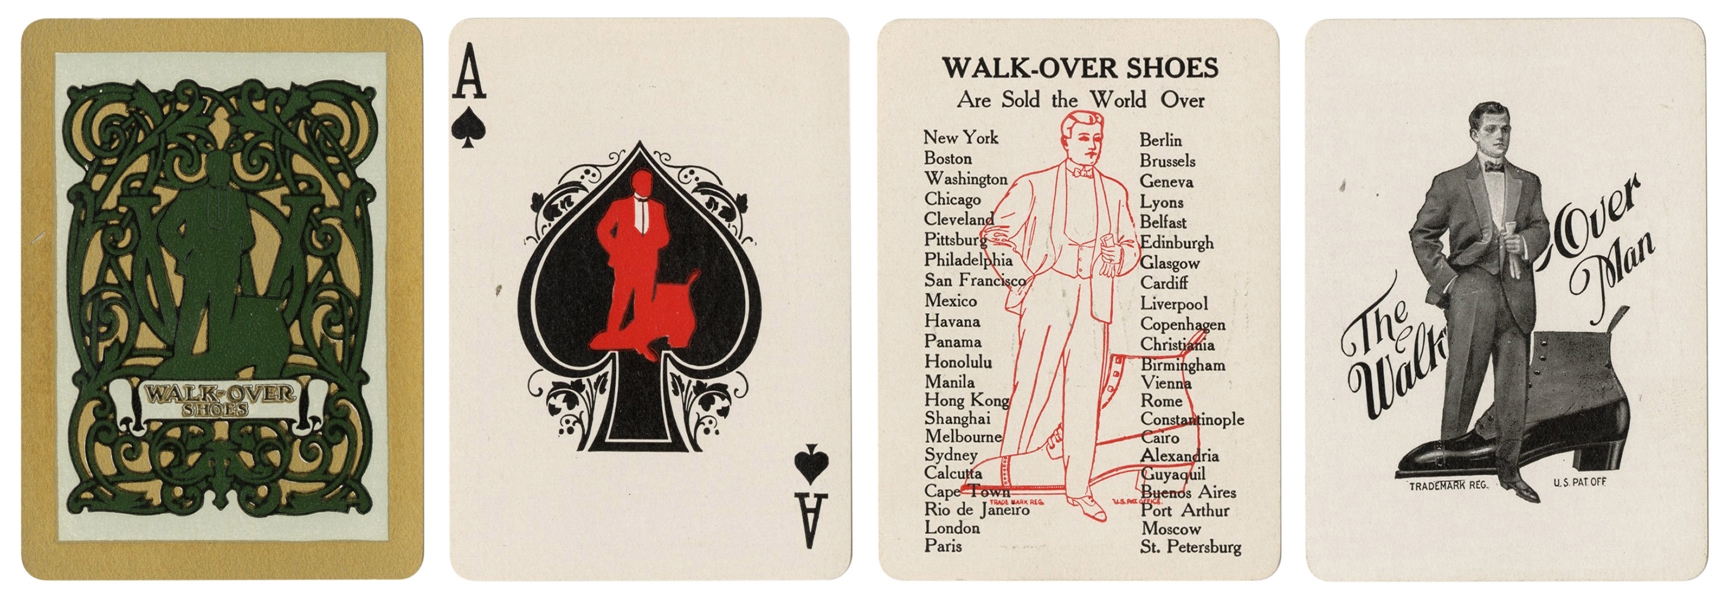  [Shoes] “Walk-Over” Shoes Advertising Playing Cards. Circa ...